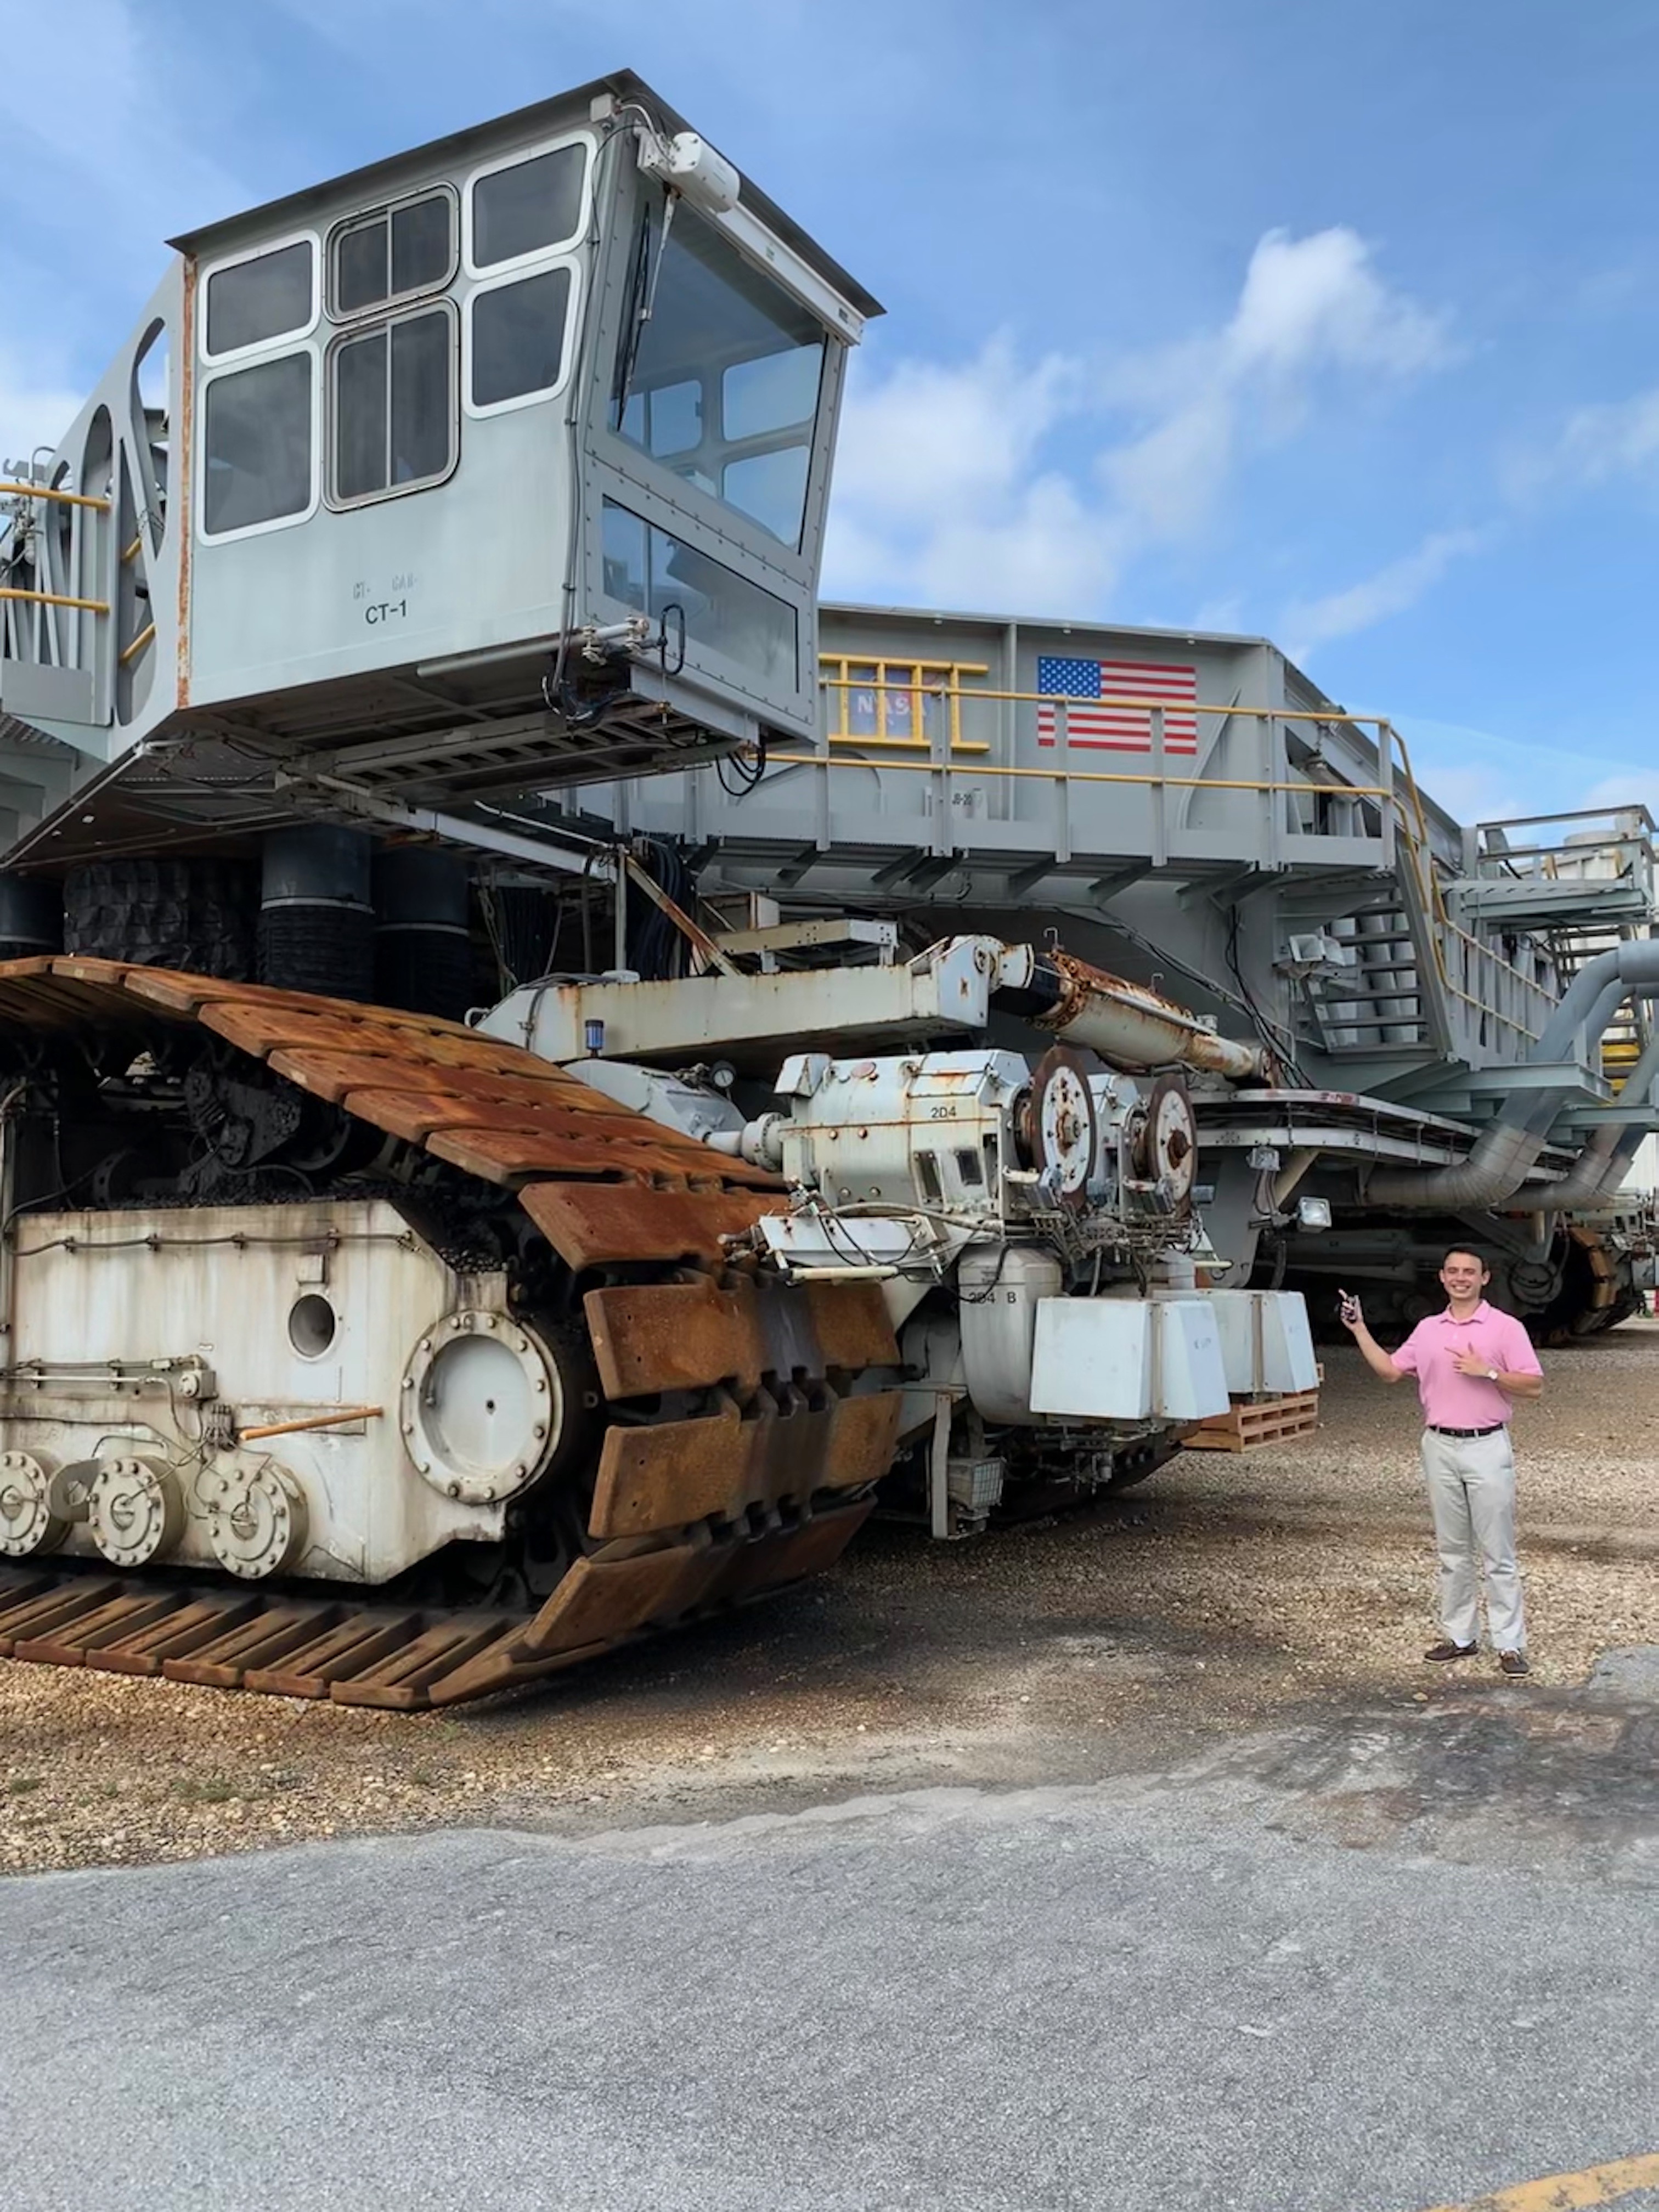 A Picture of Me With The Crawler